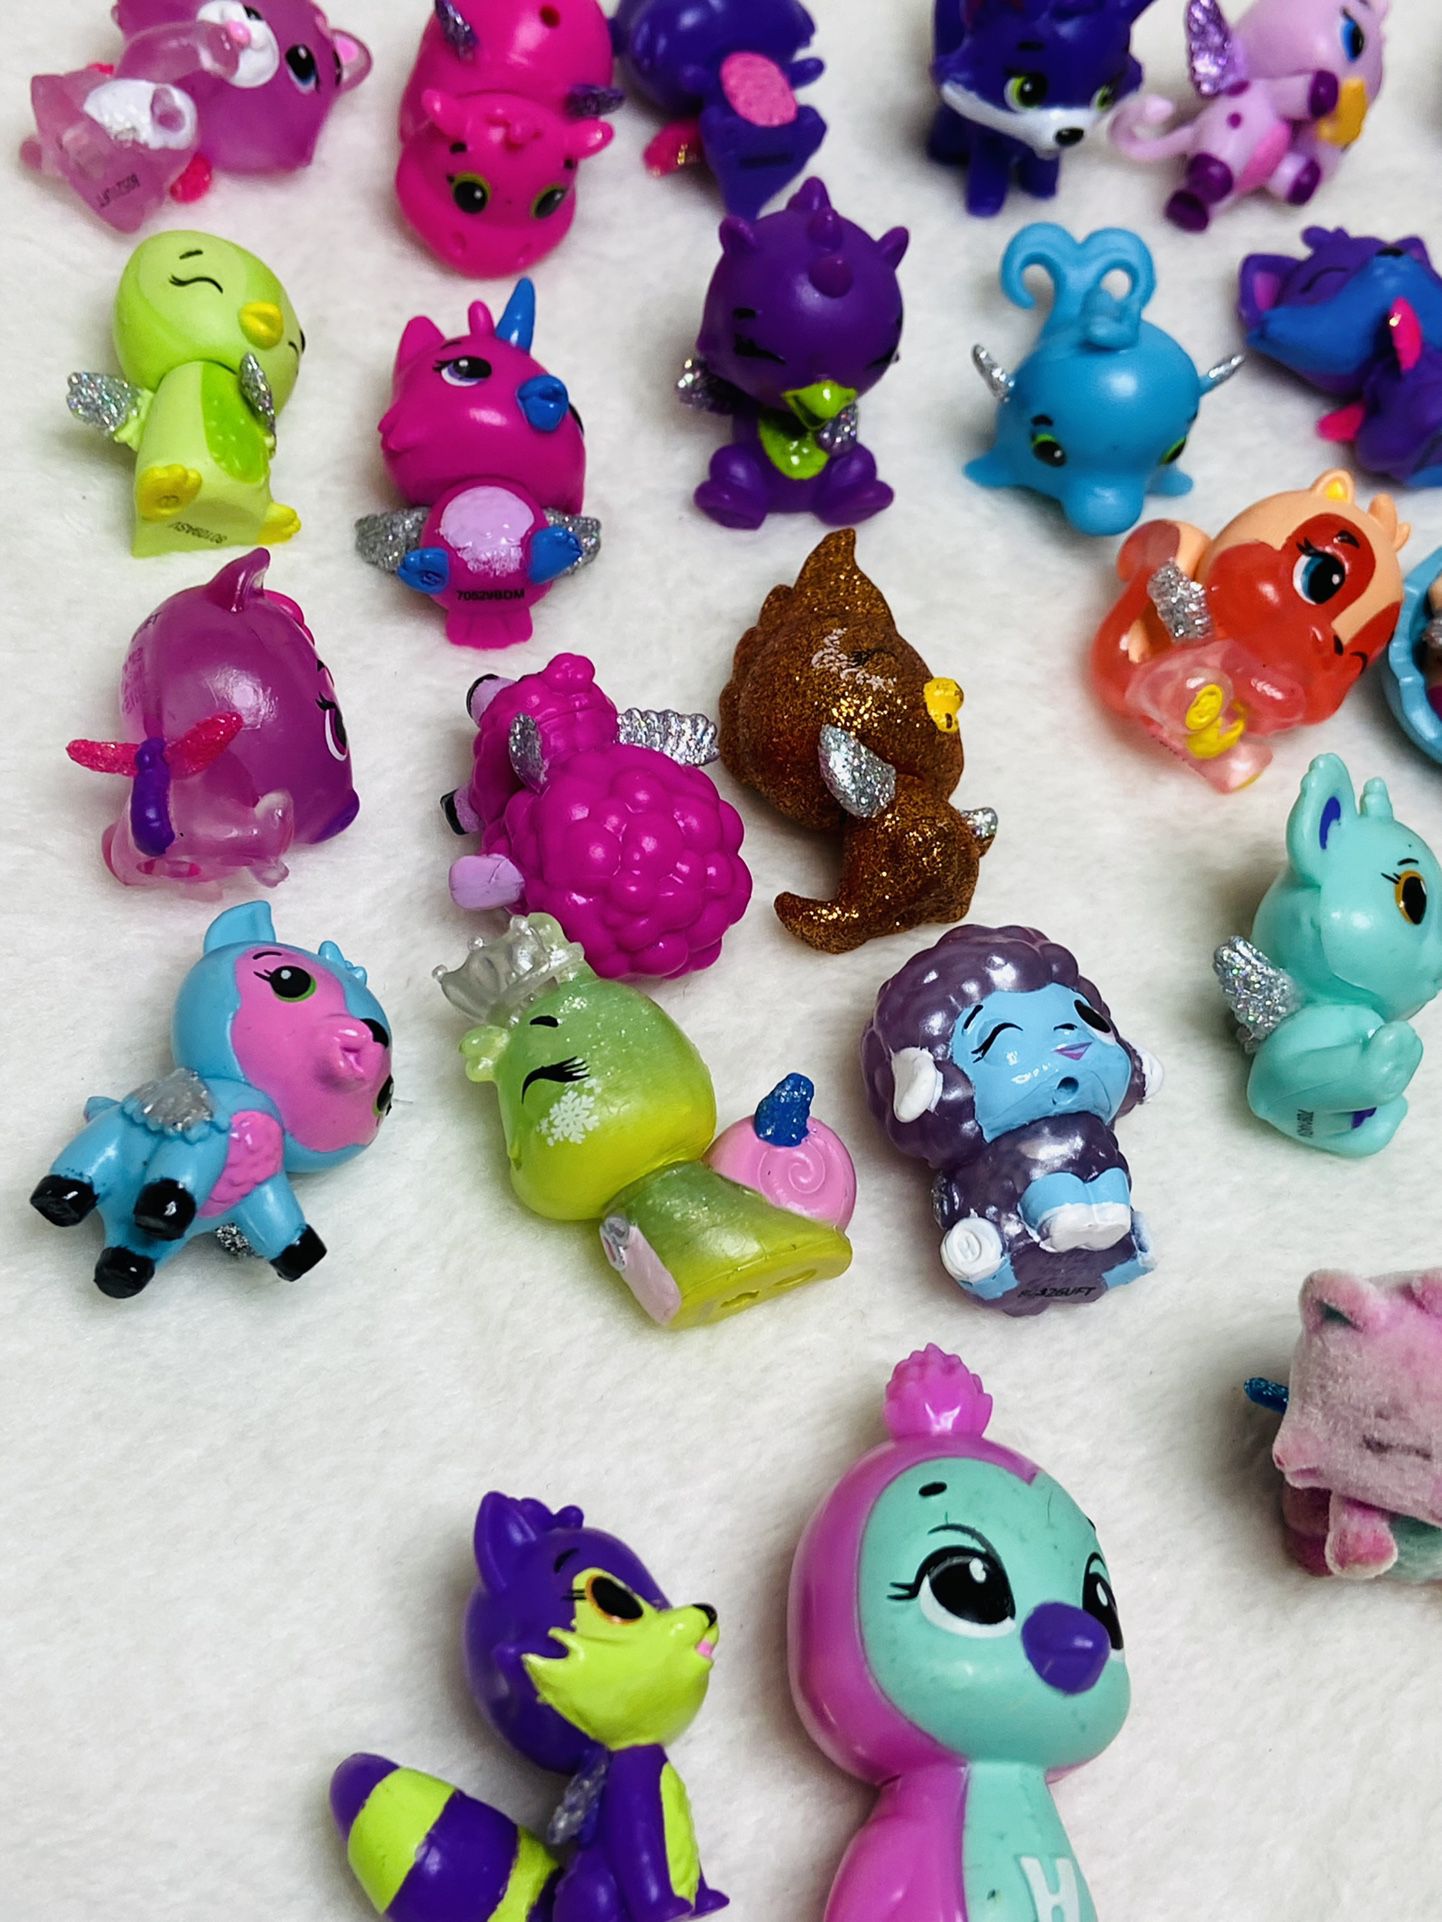 50 Hatchimals Lot Colorful Blind Bag Zoo Toys